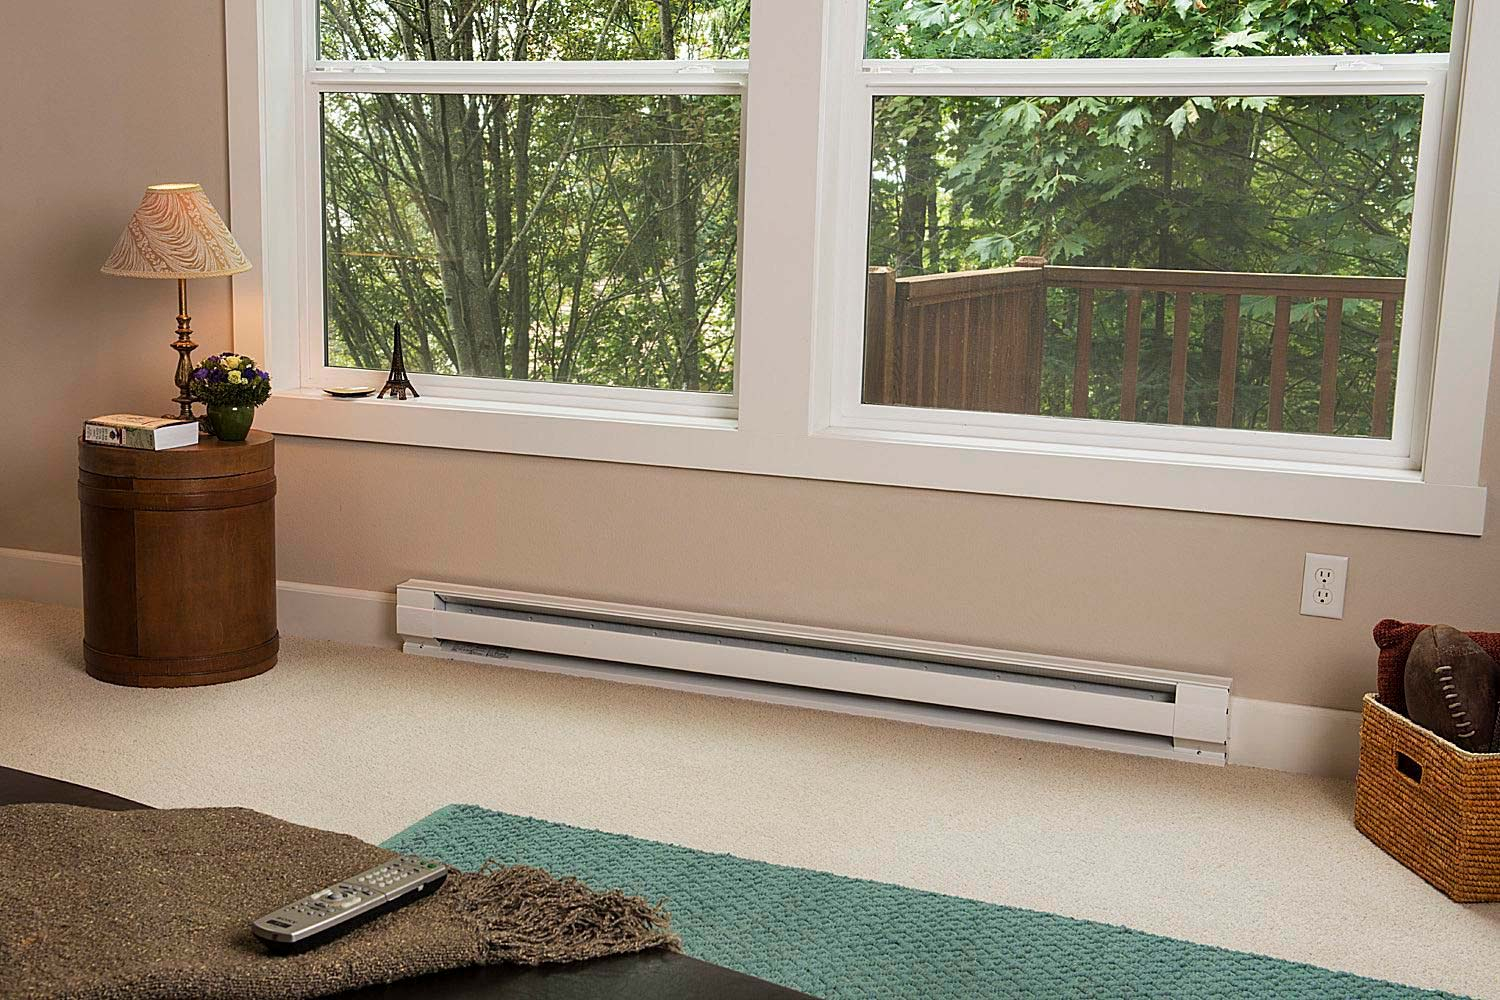 The 10 Best Electric Baseboard Heaters Improb within dimensions 1500 X 1000